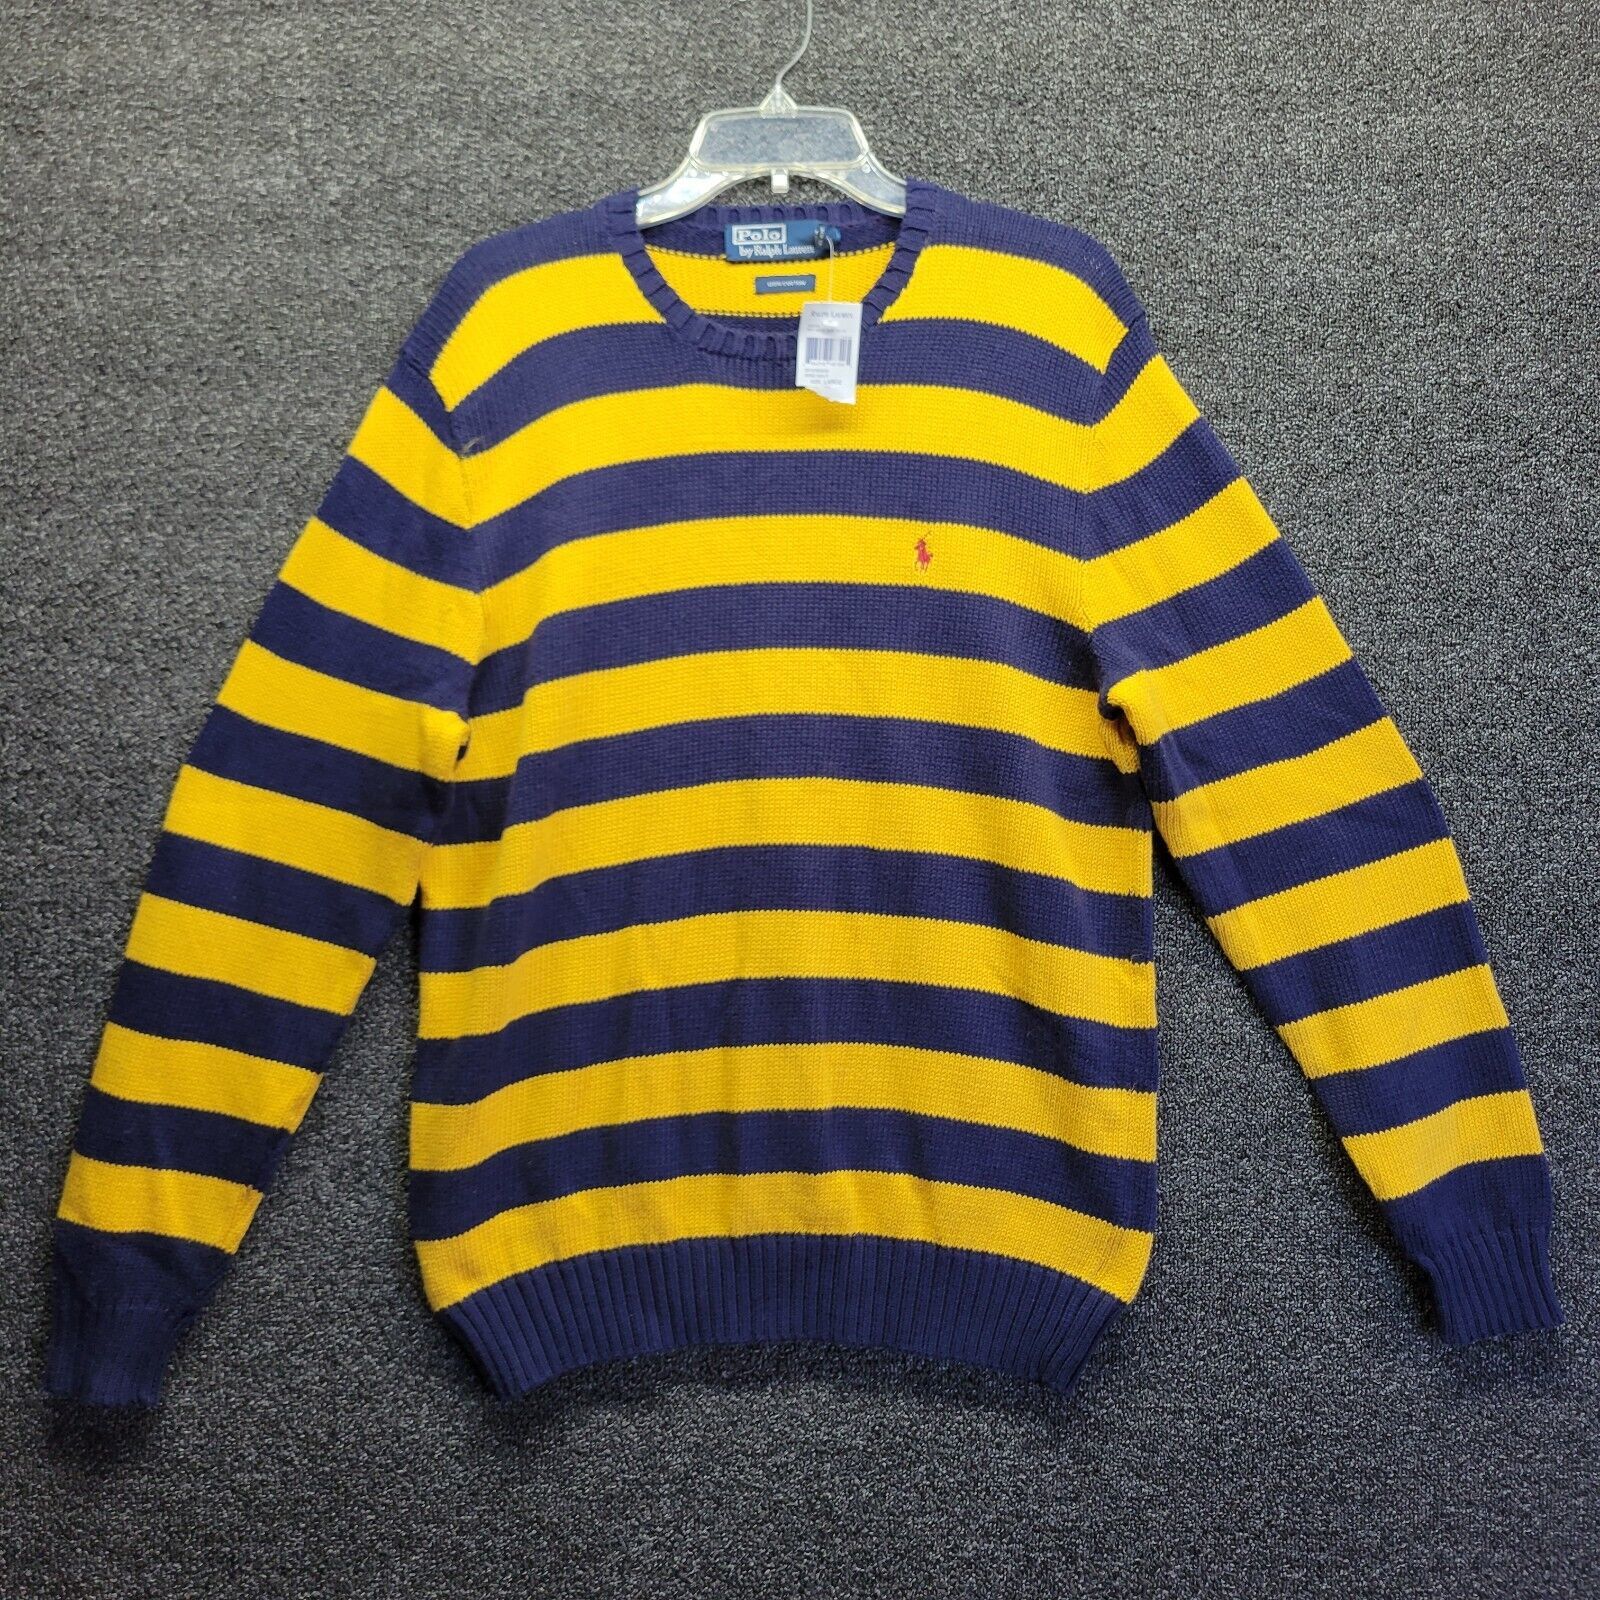 Primary image for Vtg 90’s Polo Ralph Lauren Knit Sweater Navy Blue Yellow - Men's Size Large NWT